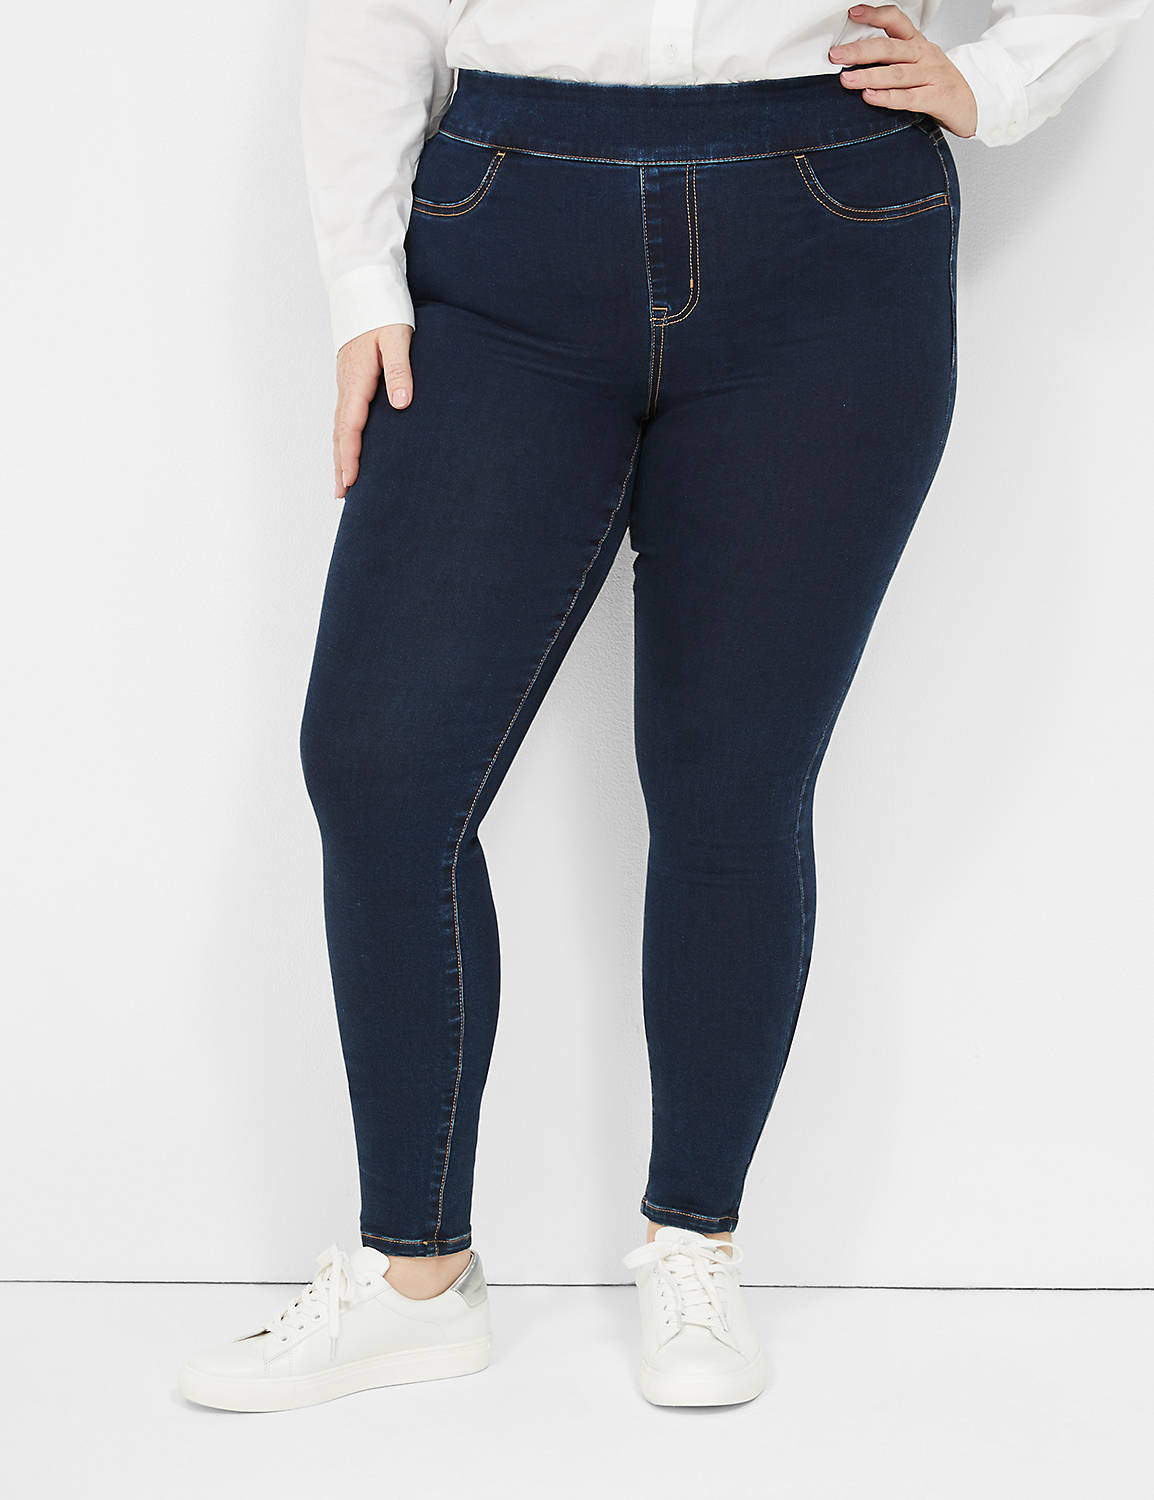 SIGNATURE HIGH RISE PULL ON JEGGING Product Image 1